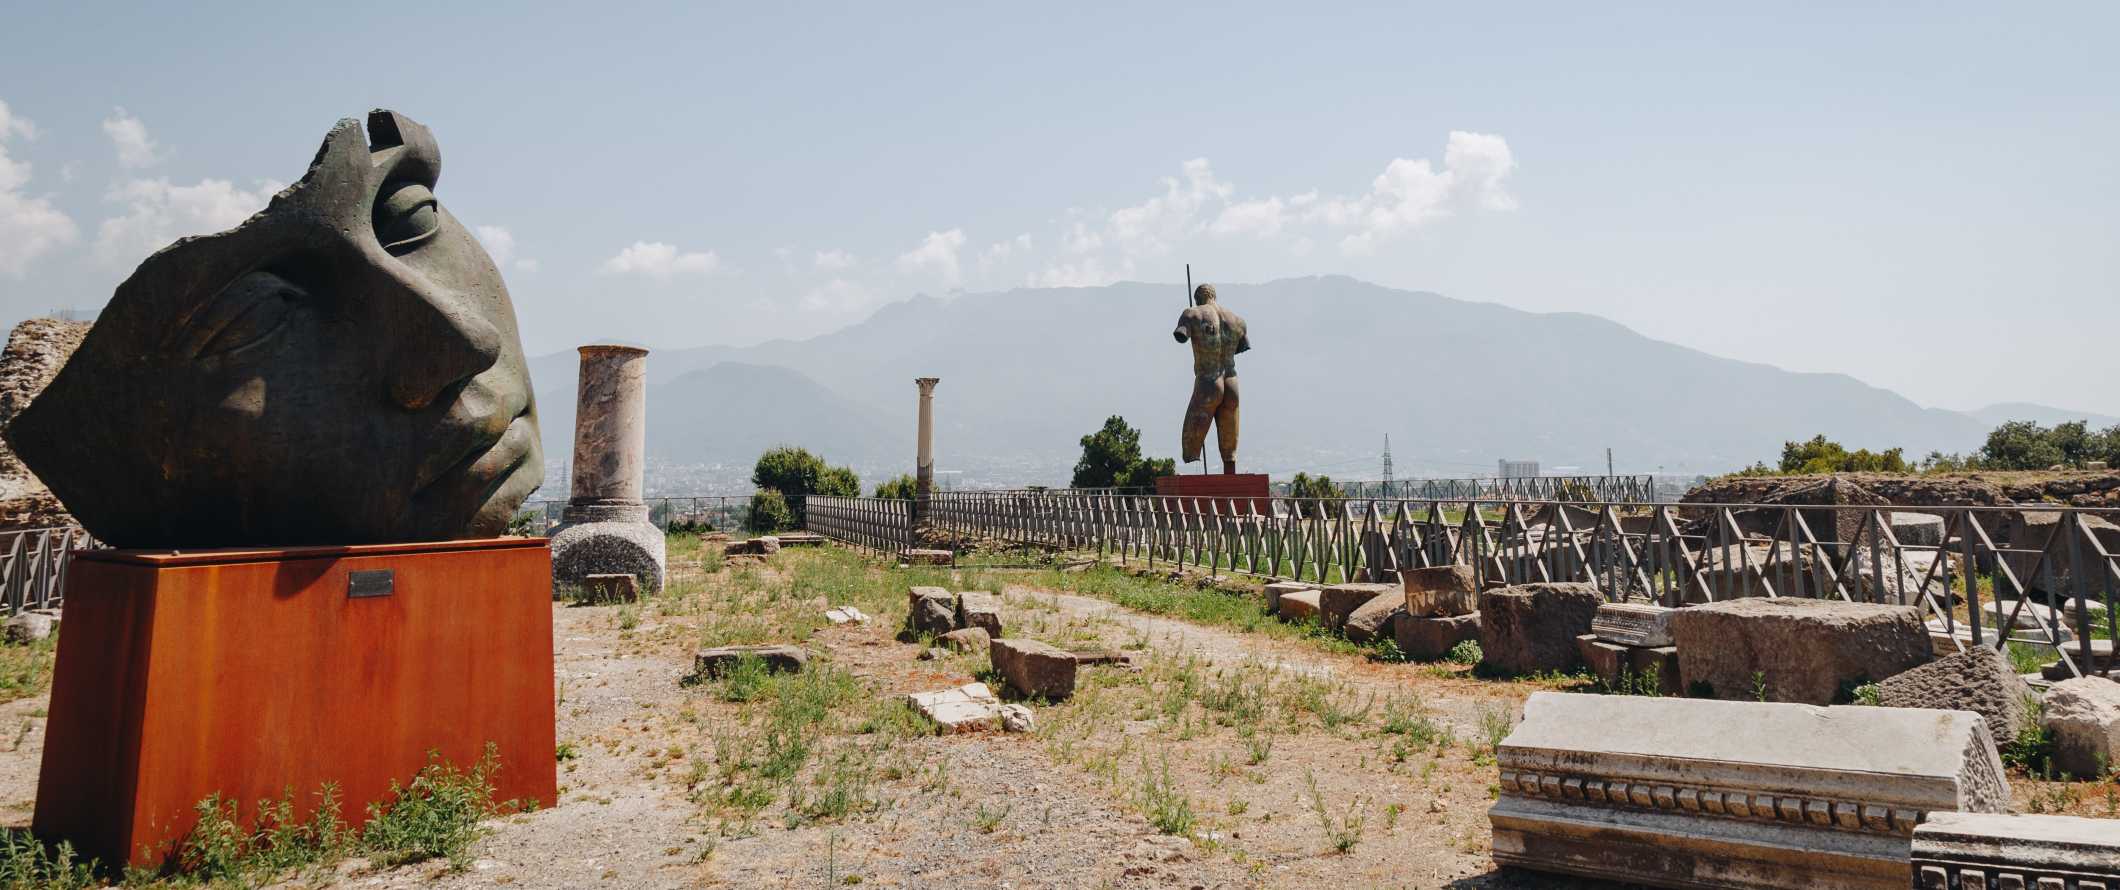 Ruins of Pompeii with Mount Vesuvius in the background, near Naples, Italy.